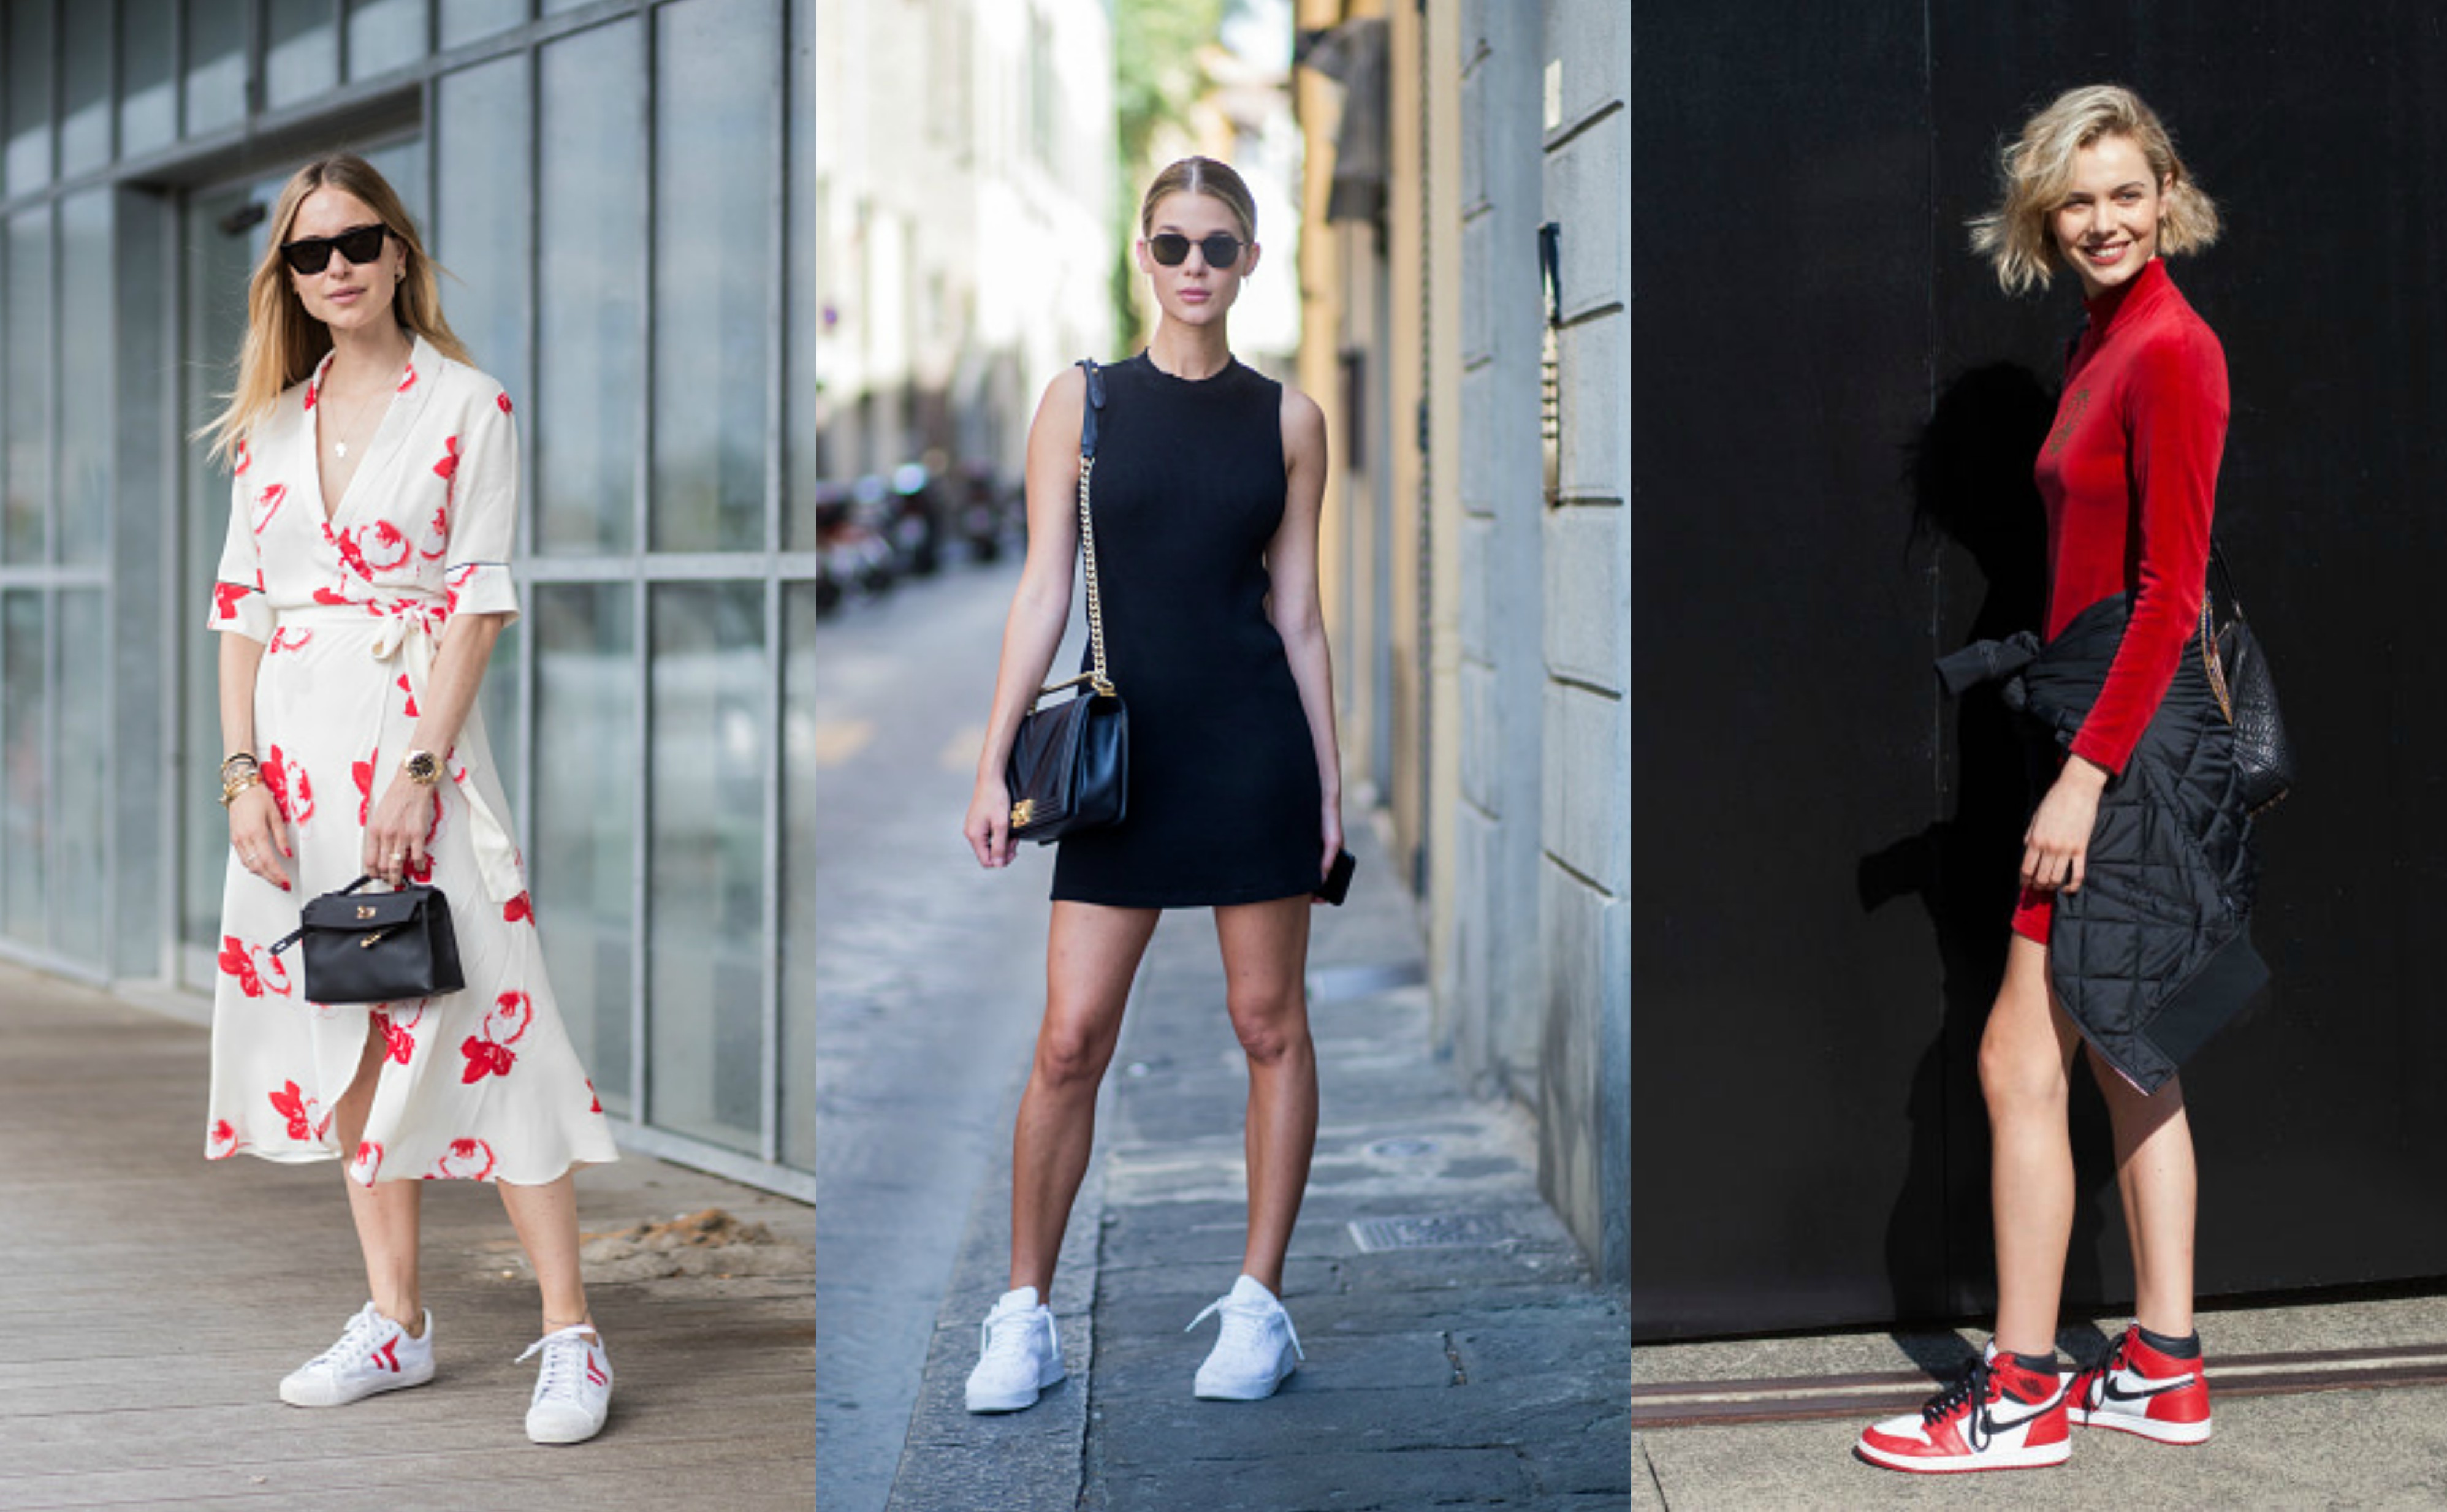 5 Office Outfits That Pair Well With Sneakers - The Everygirl